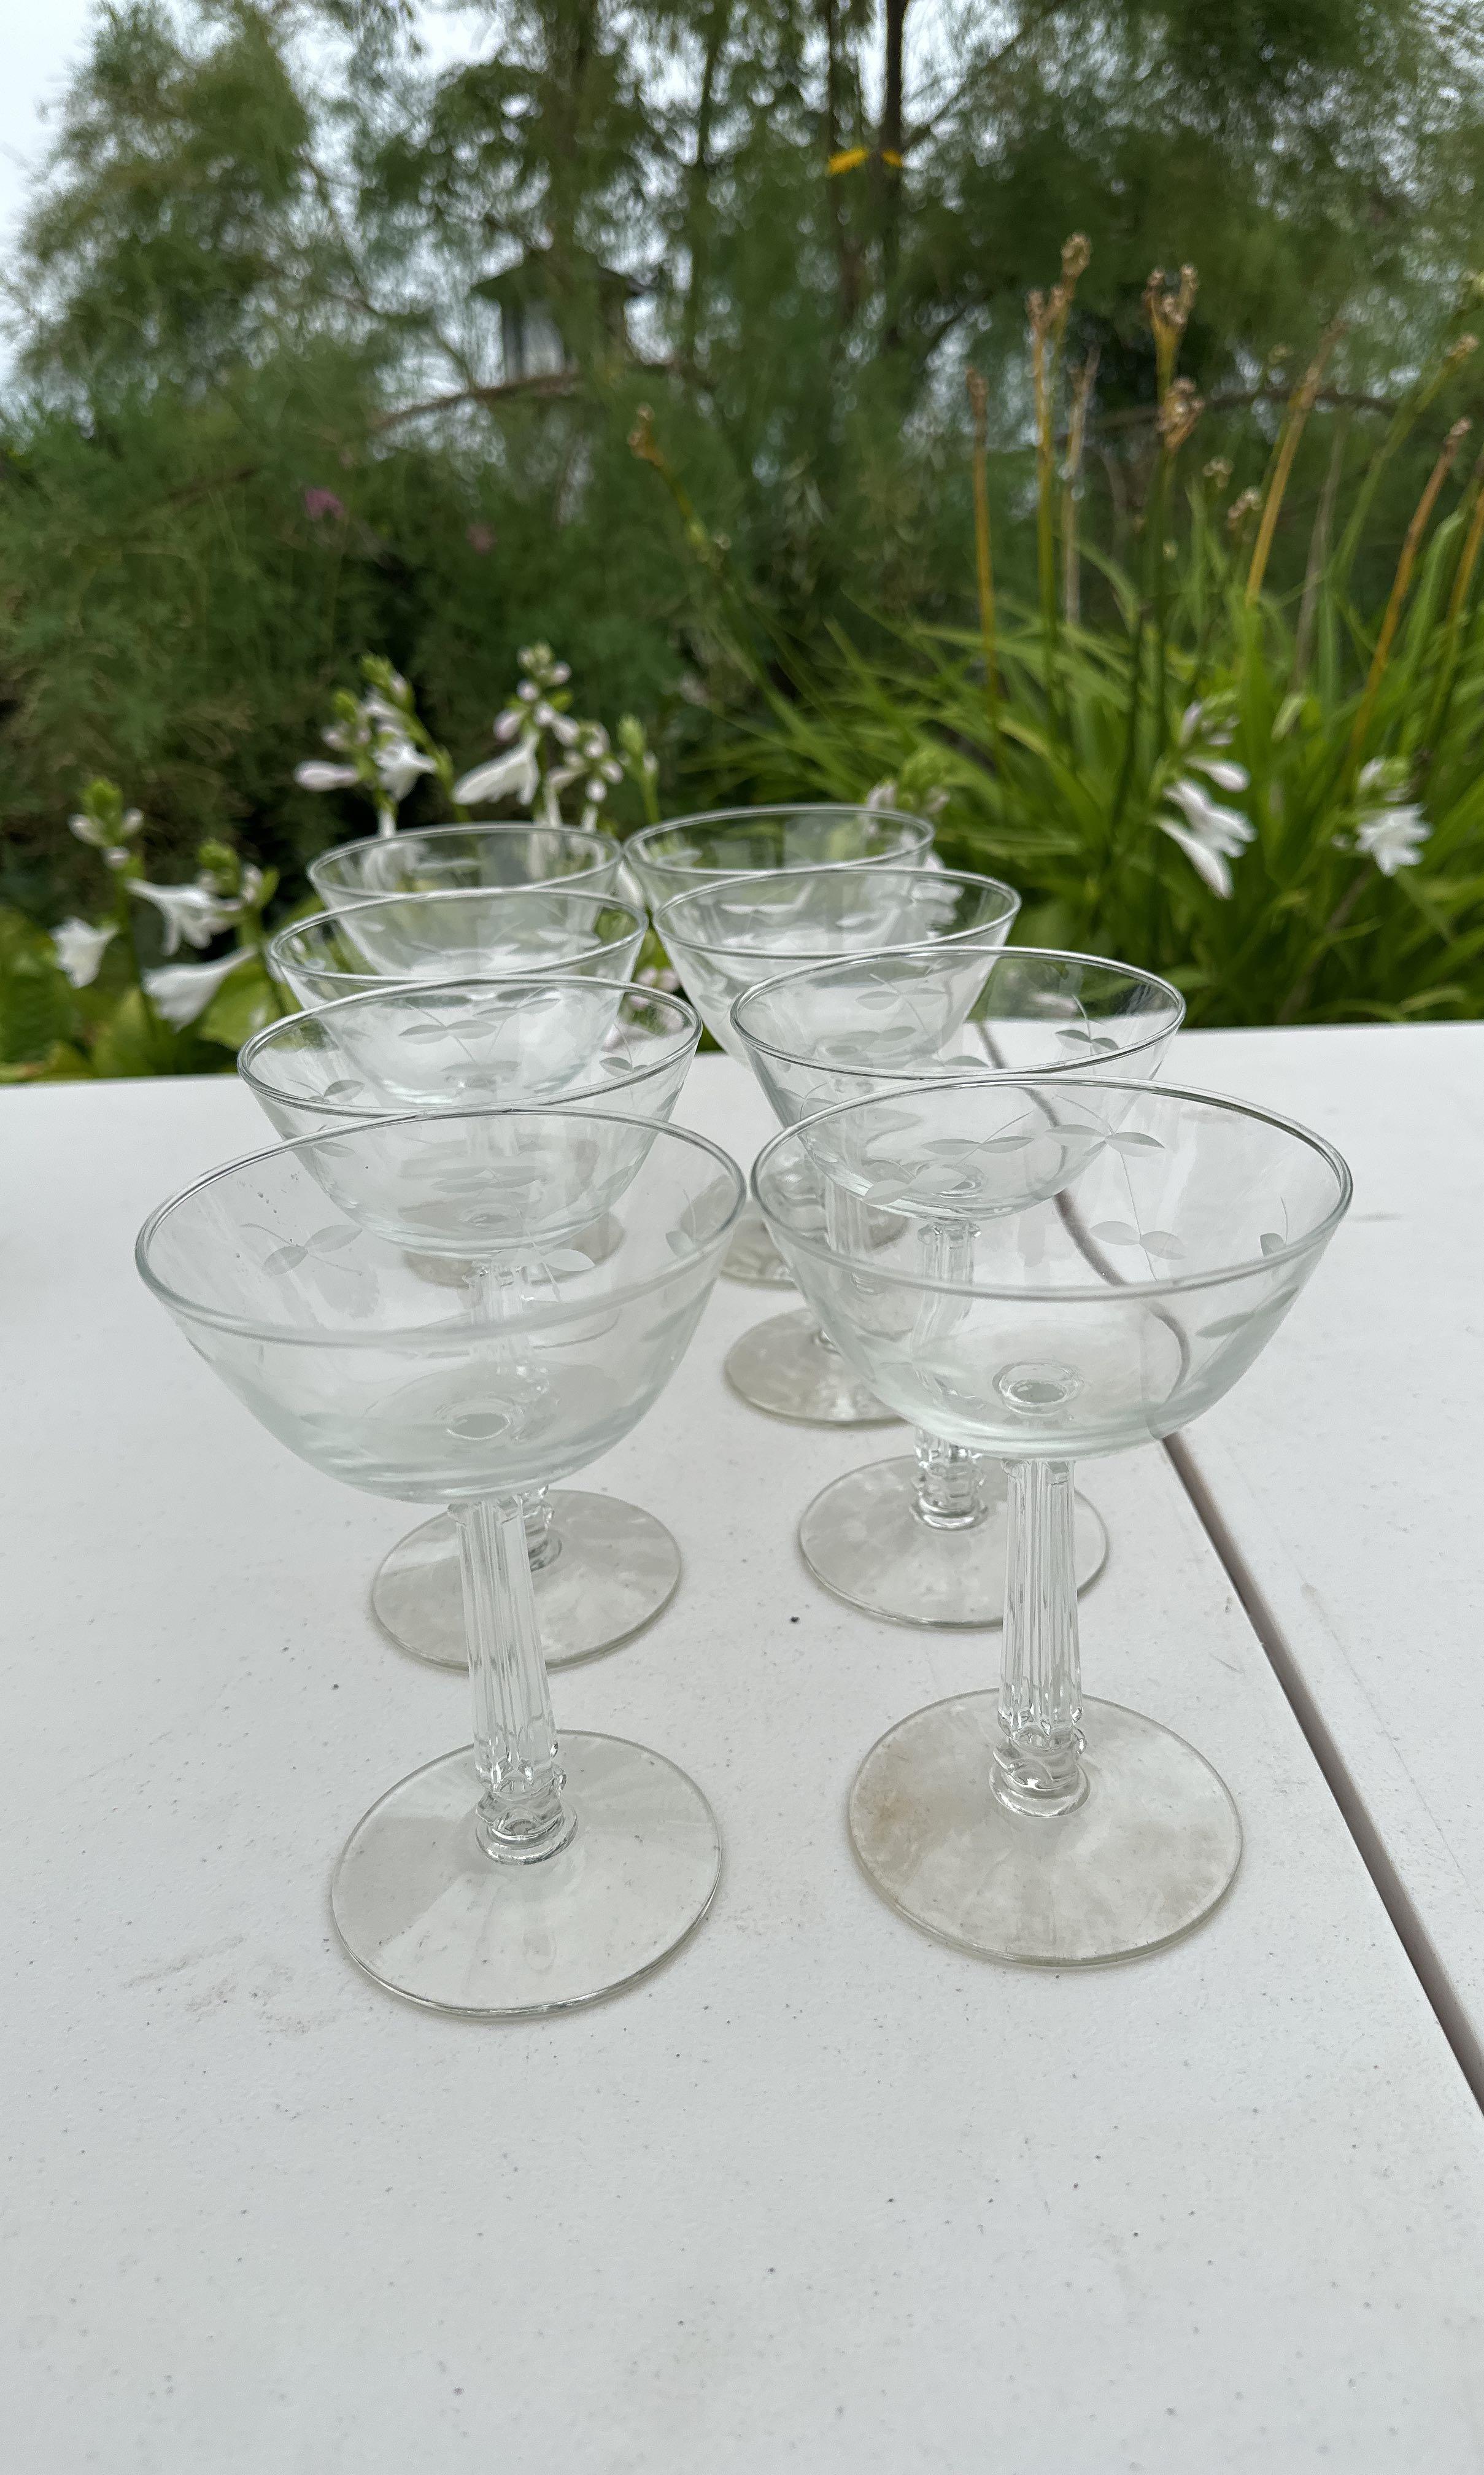 Kay Large Beach Resin Wine Glass  Coastal Clothing, Home Decor and Fun  Gifts